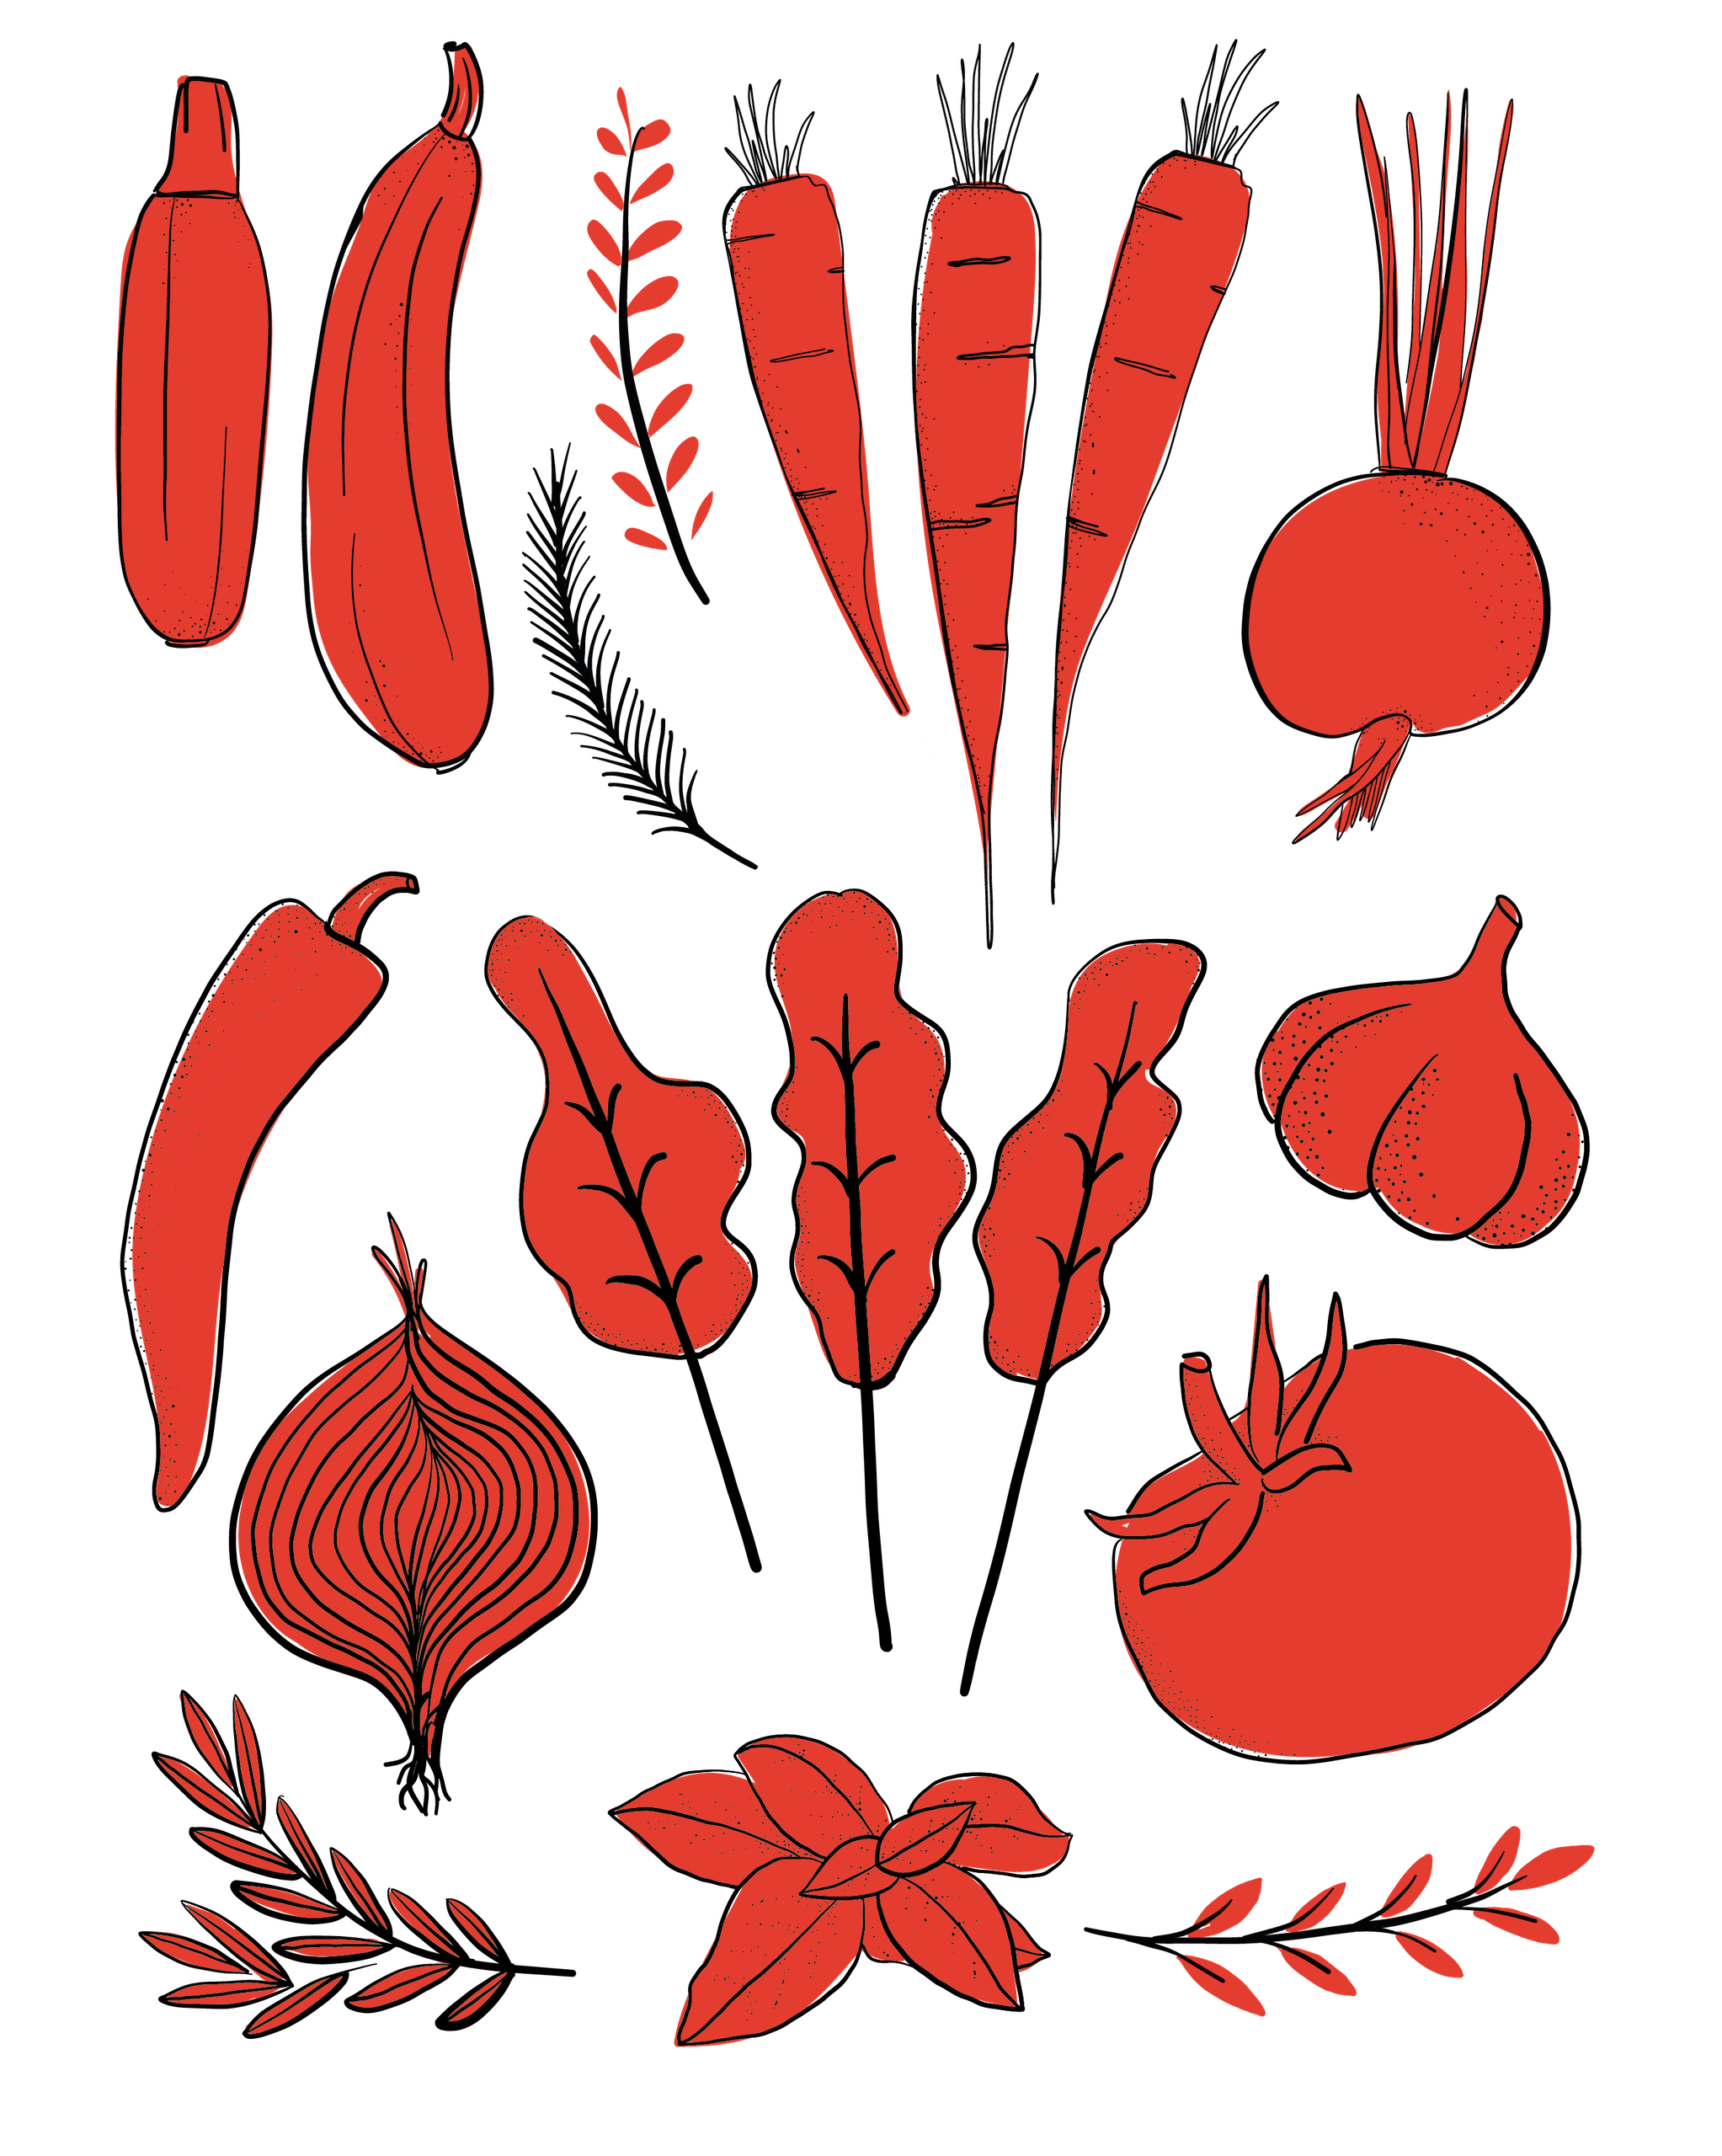 Illustration of vegetables all colored red.